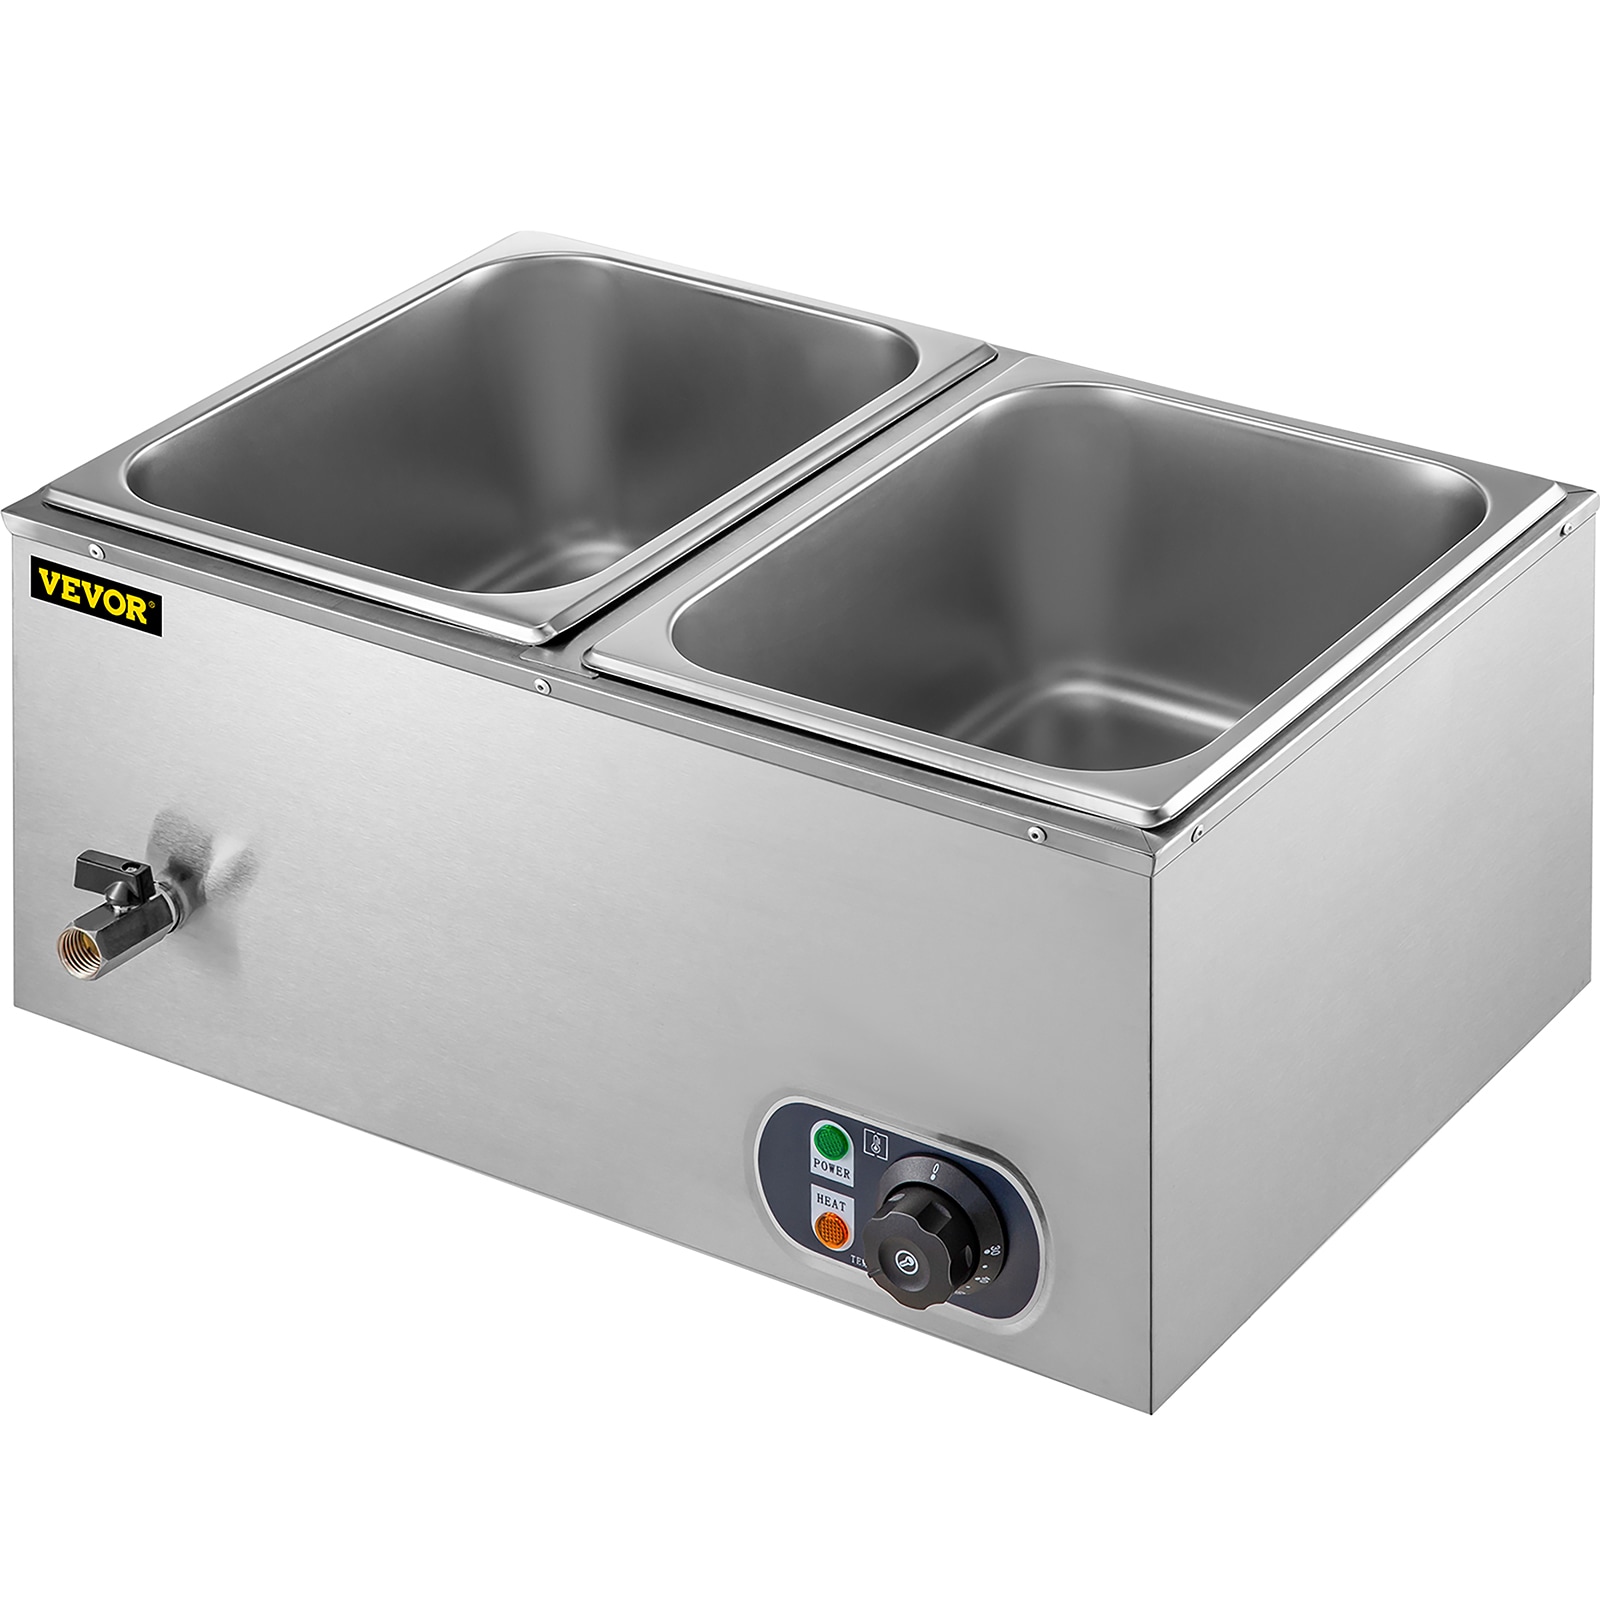 VEVOR Commercial Food Warmer 24qt Bain Marie 1200W Electric Buffet Warmer Soup Warmer Stove Steam Countertop Stainless Steel Container Temperature